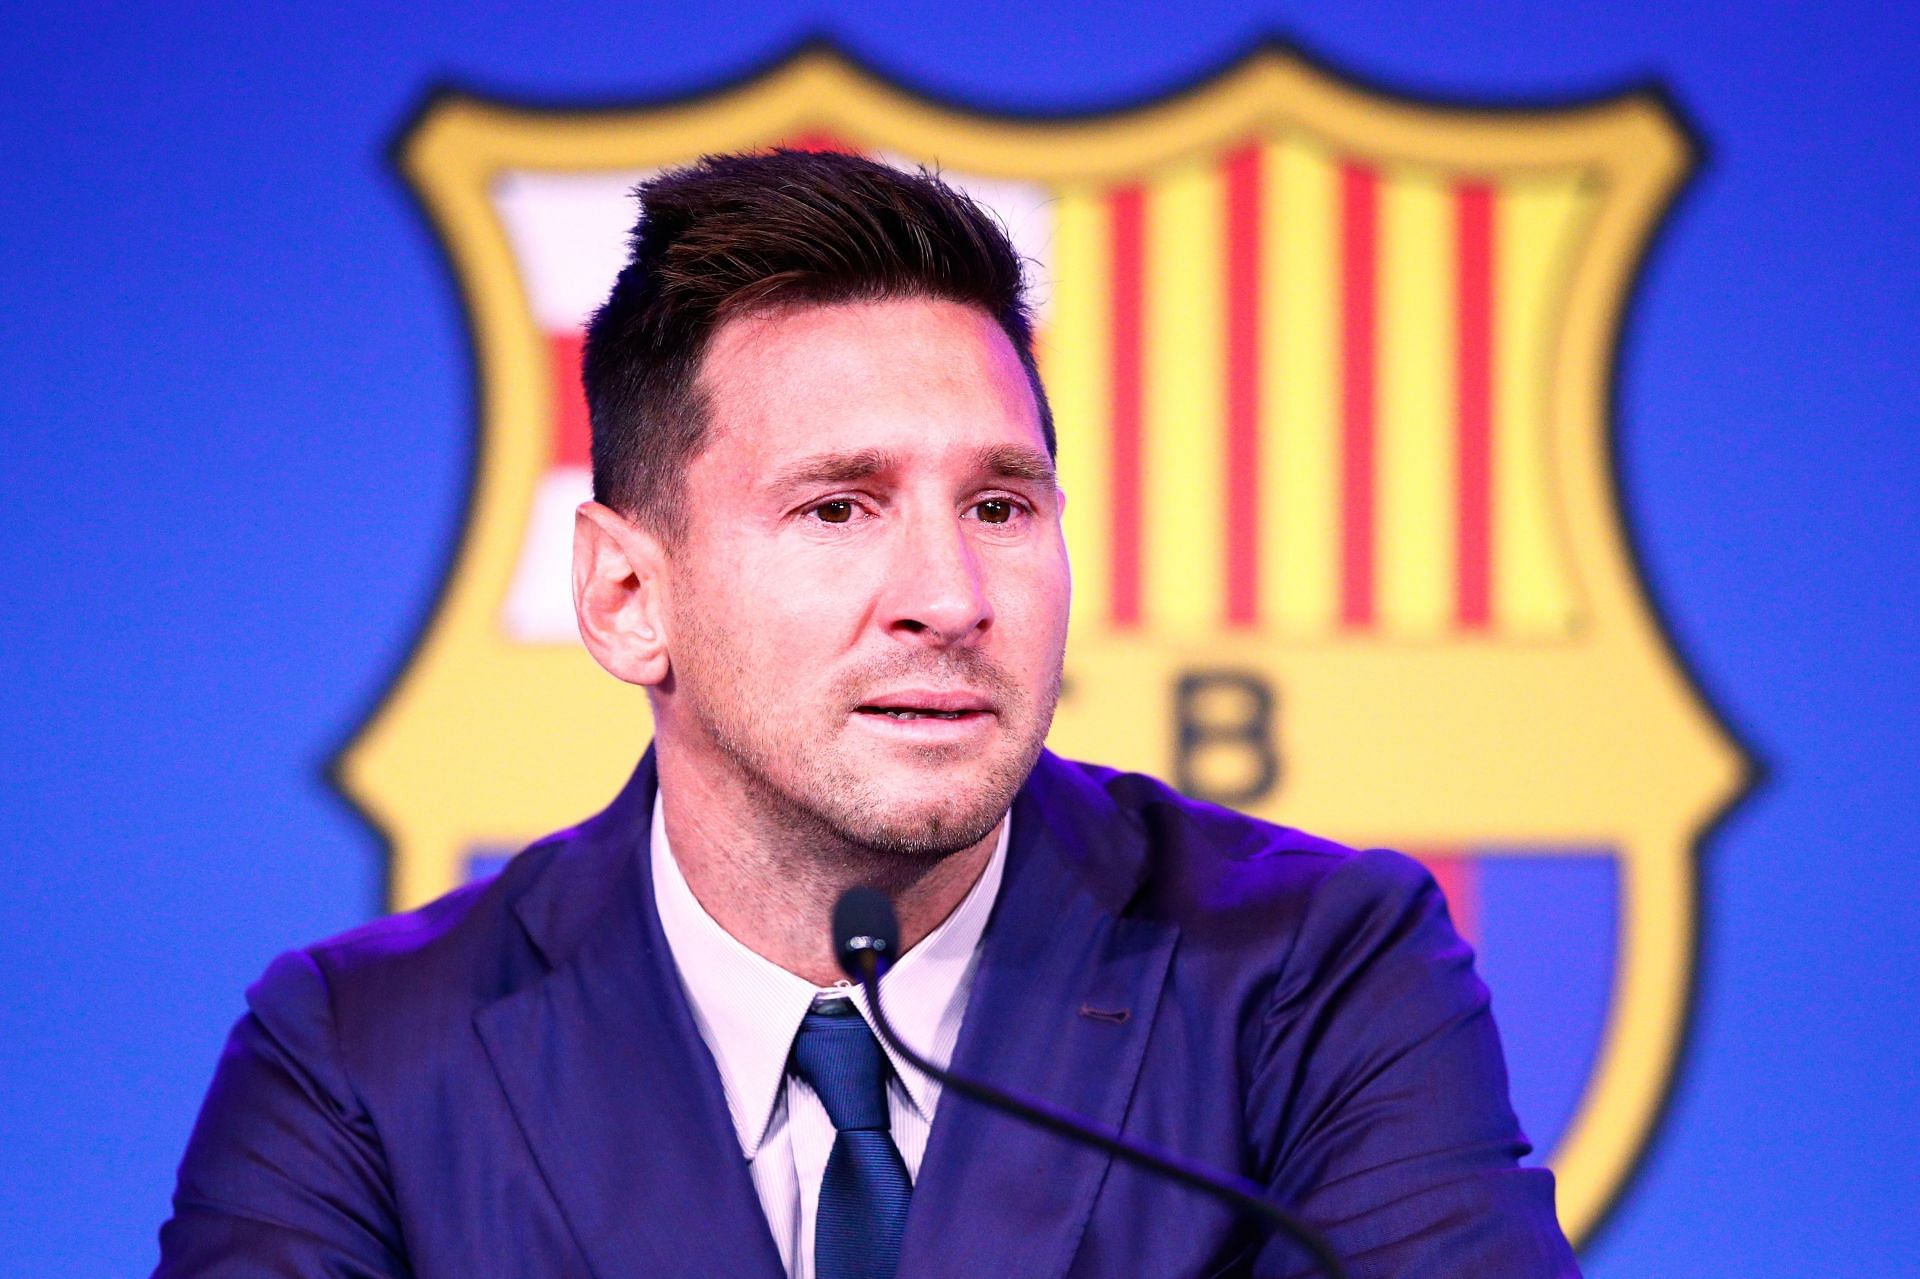 Lionel Messi was emotional as he bid farewell in 2021.